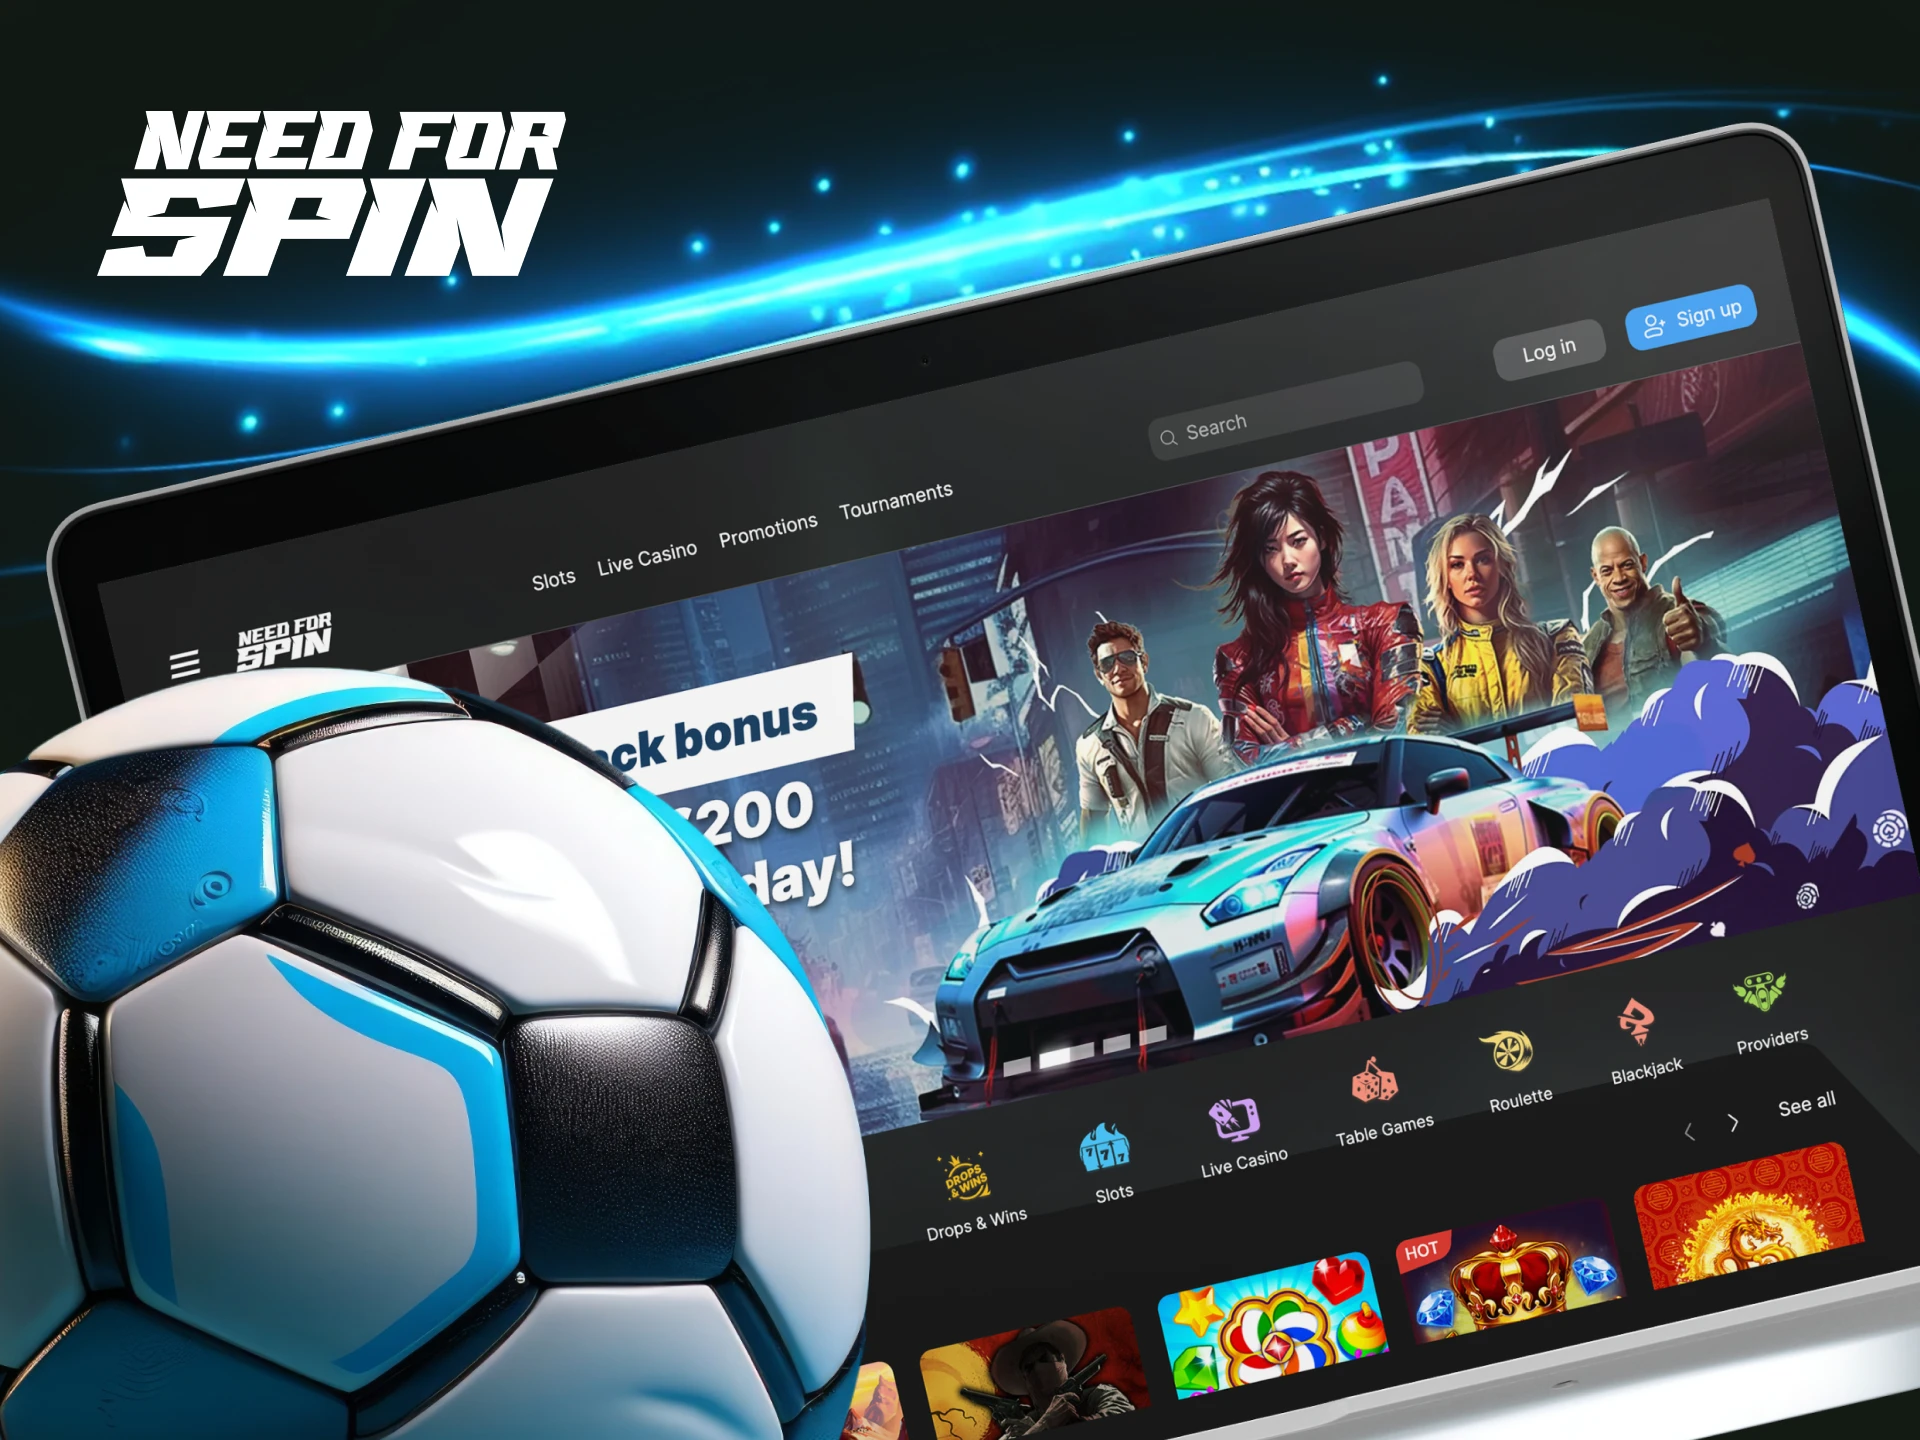 Can I bet on sports on the Need For Spin online casino website.